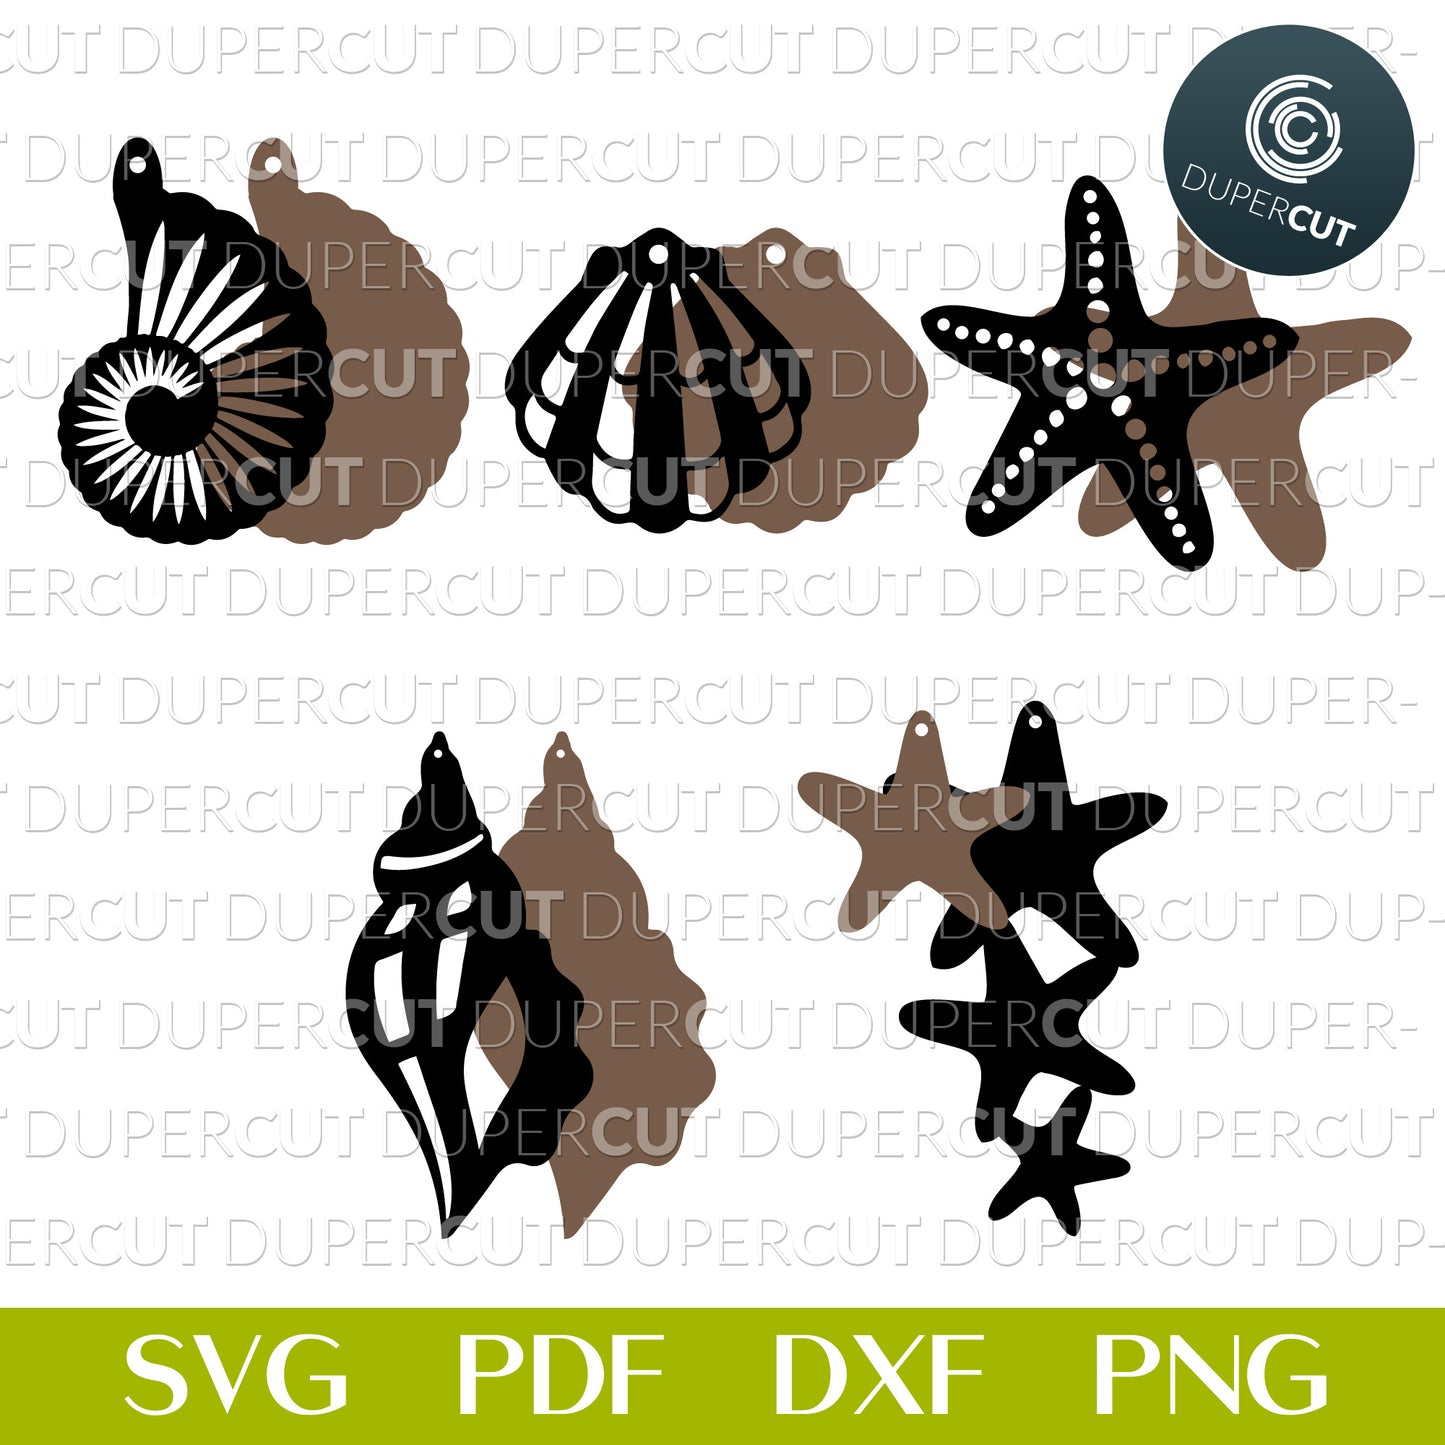 Layered seashell earrings vector files - starfish, conch shell, SVG PDF DXF template for laser cutting on wood, leather, acrylic. Use with Glowforge, Cricut, Silhouette cameo.